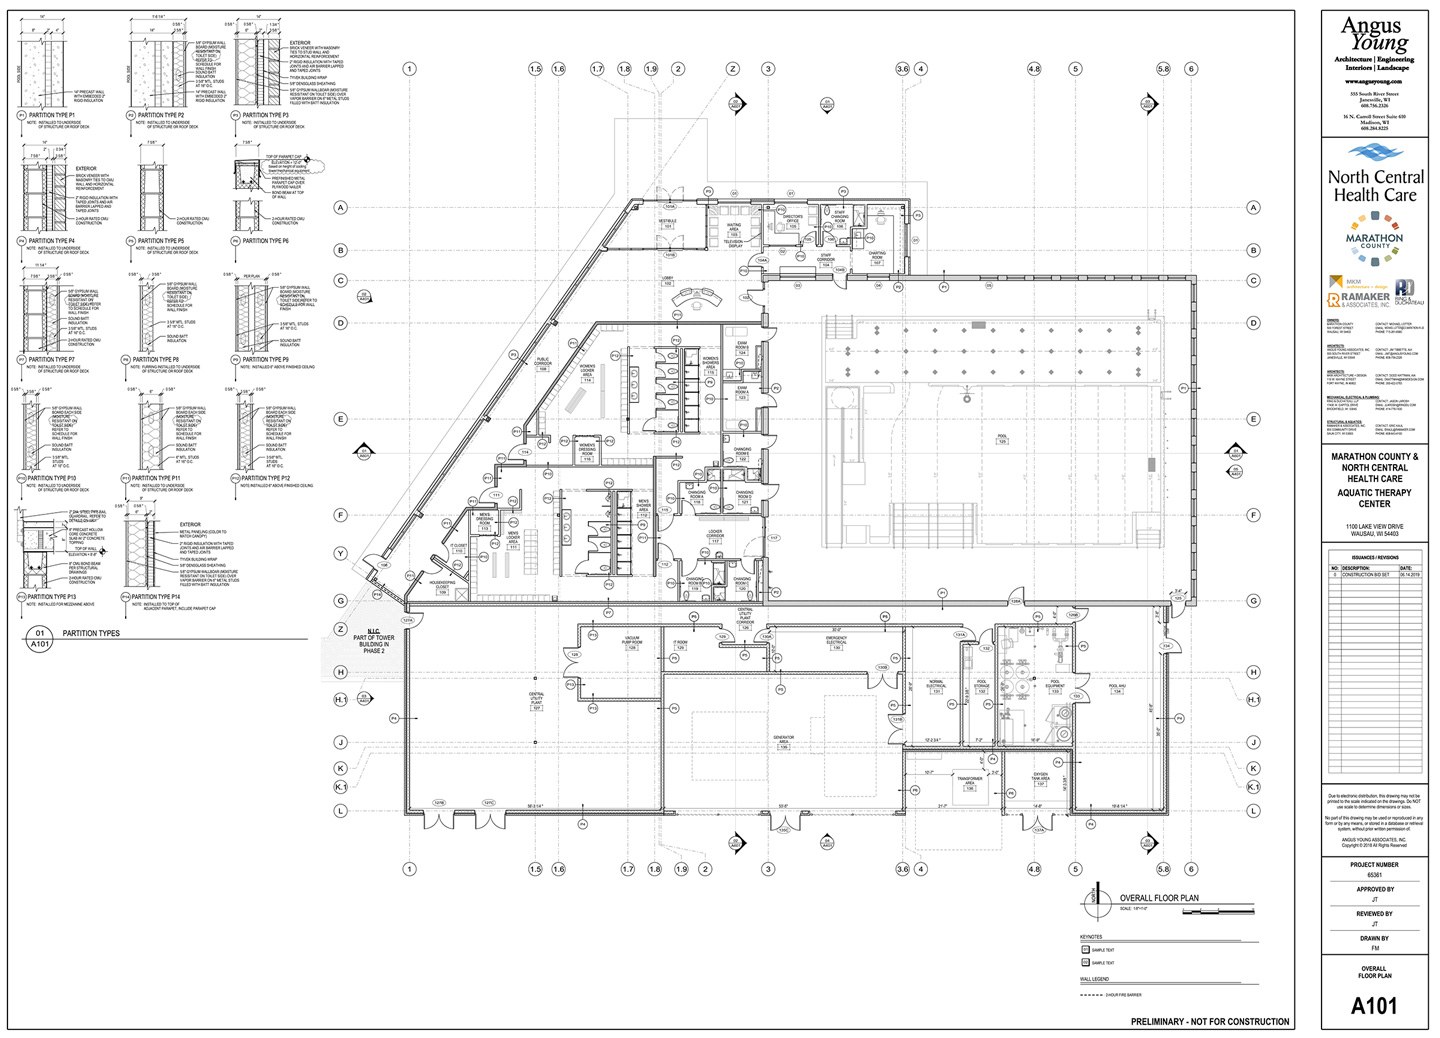 Aquatic Therapy Pool Preliminary Plans